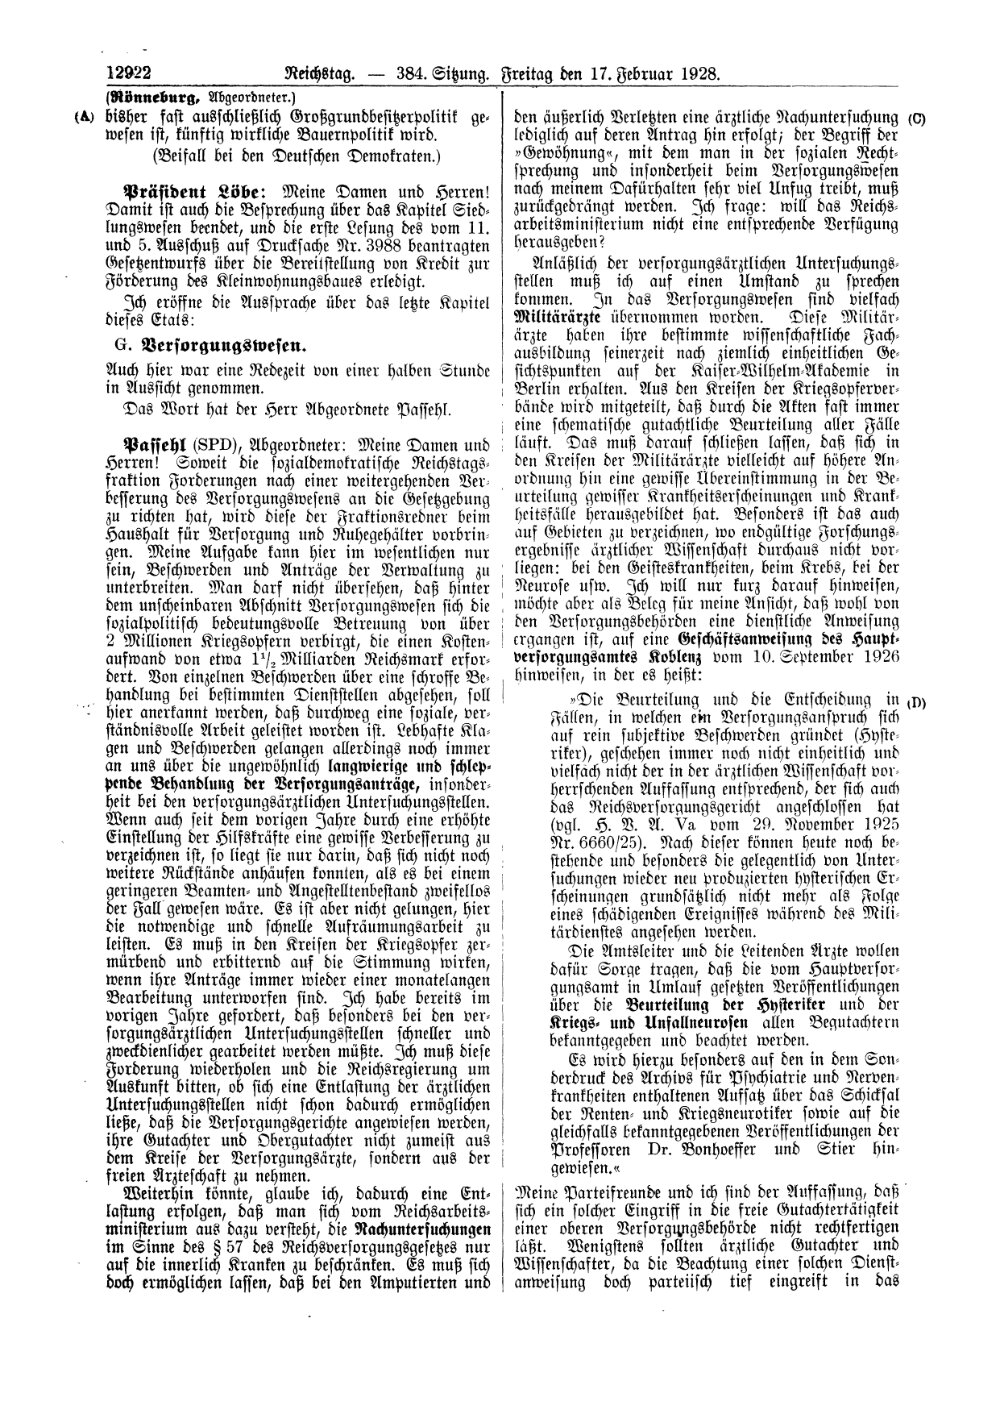 Scan of page 12922